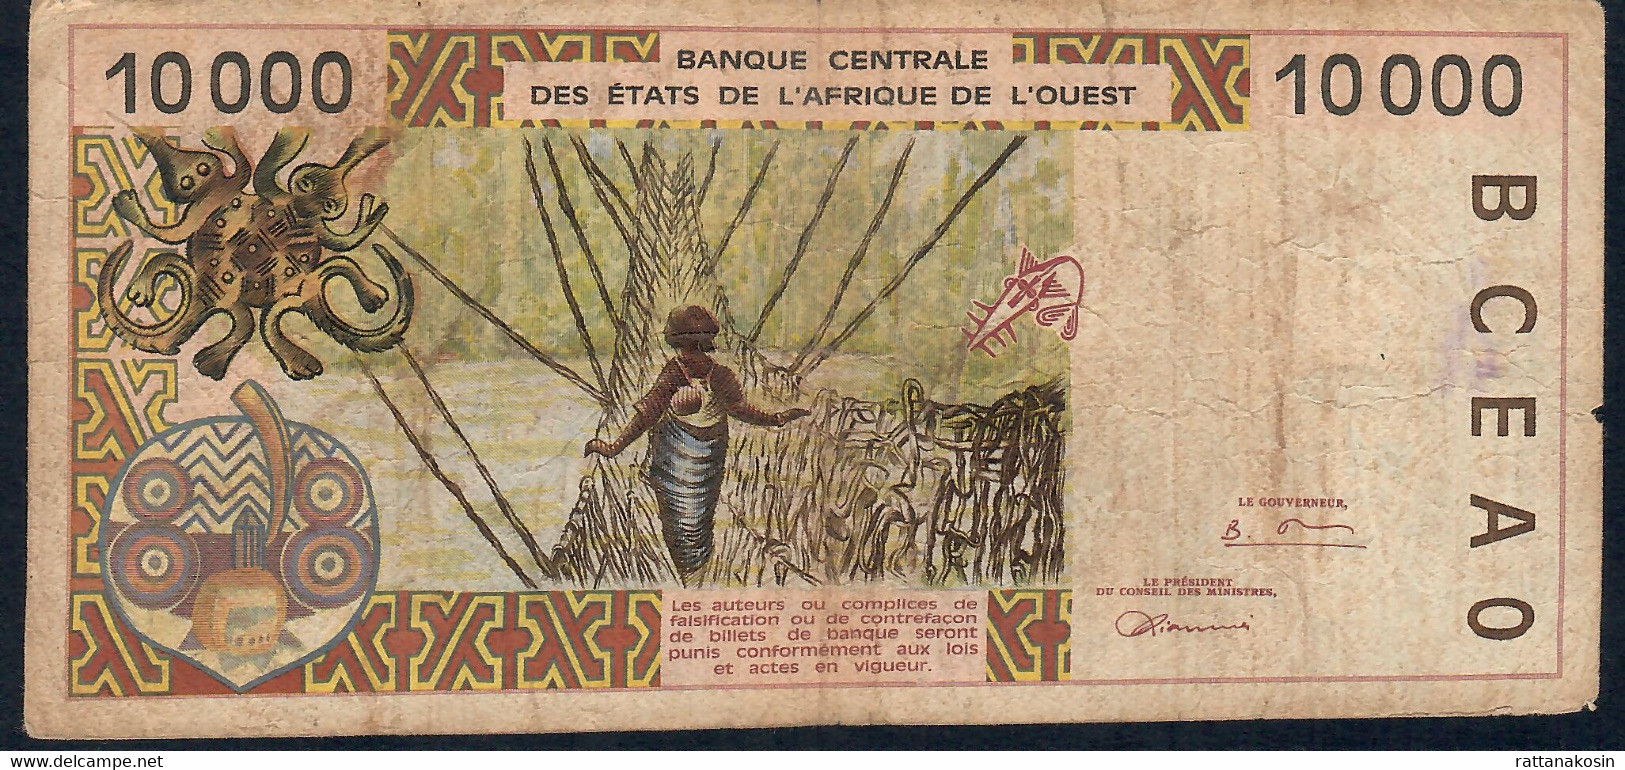 W.A.S. BENIN  P214Bd  10000 Or 10.000 FRANCS (19)96 1996 Signature 28      FINE Only 1  P.h.! - Stati Dell'Africa Occidentale